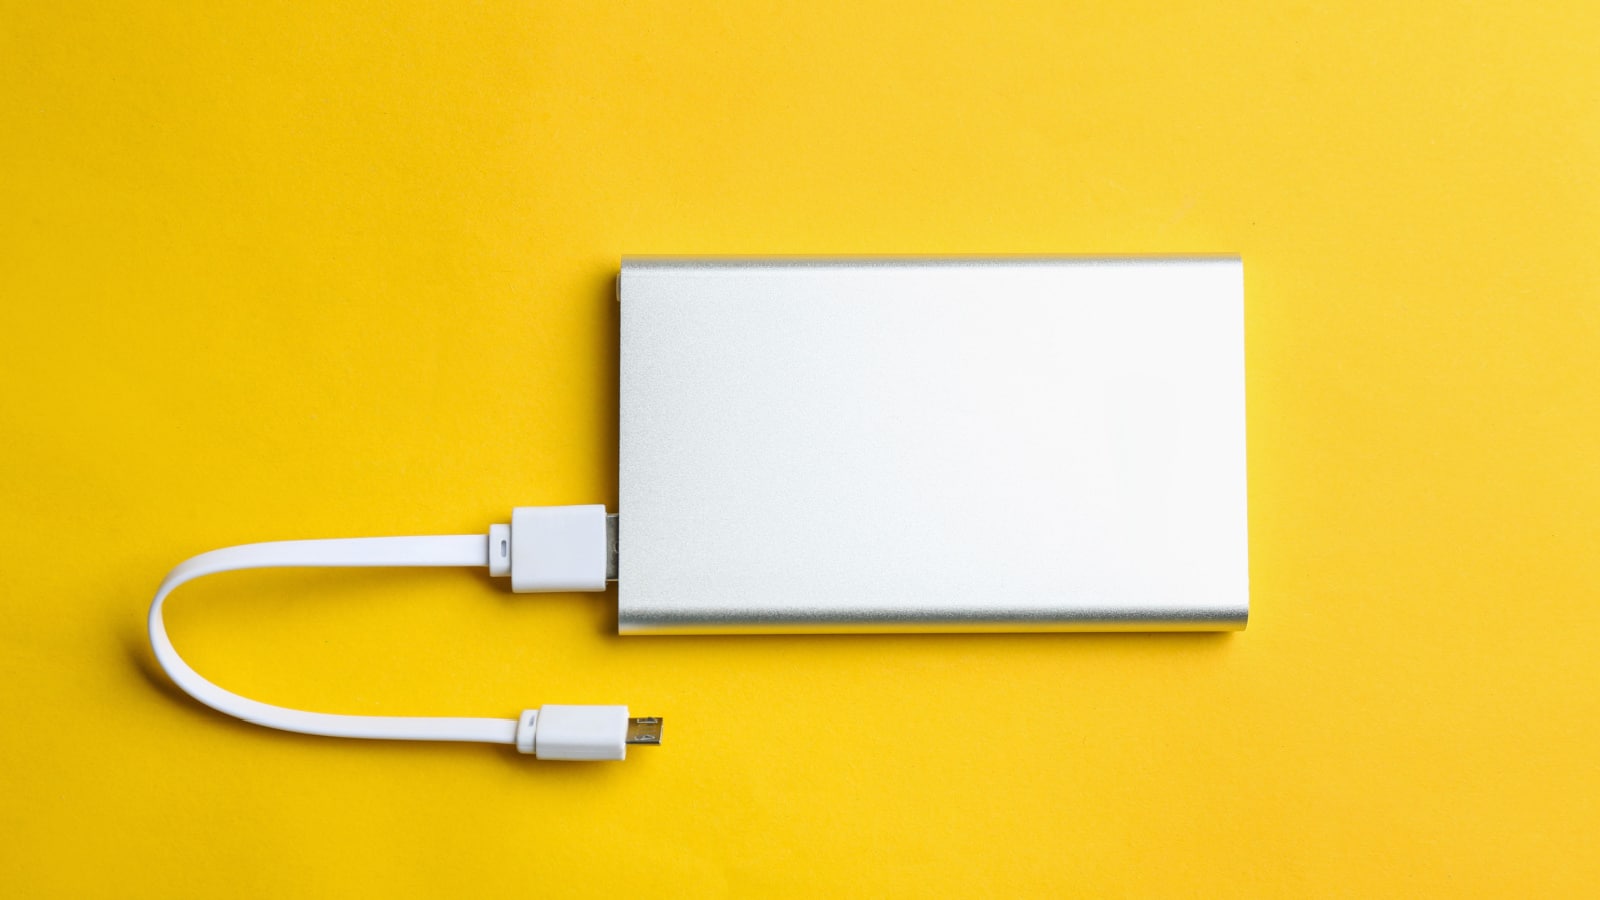 Modern portable charger with cable on yellow background, top view